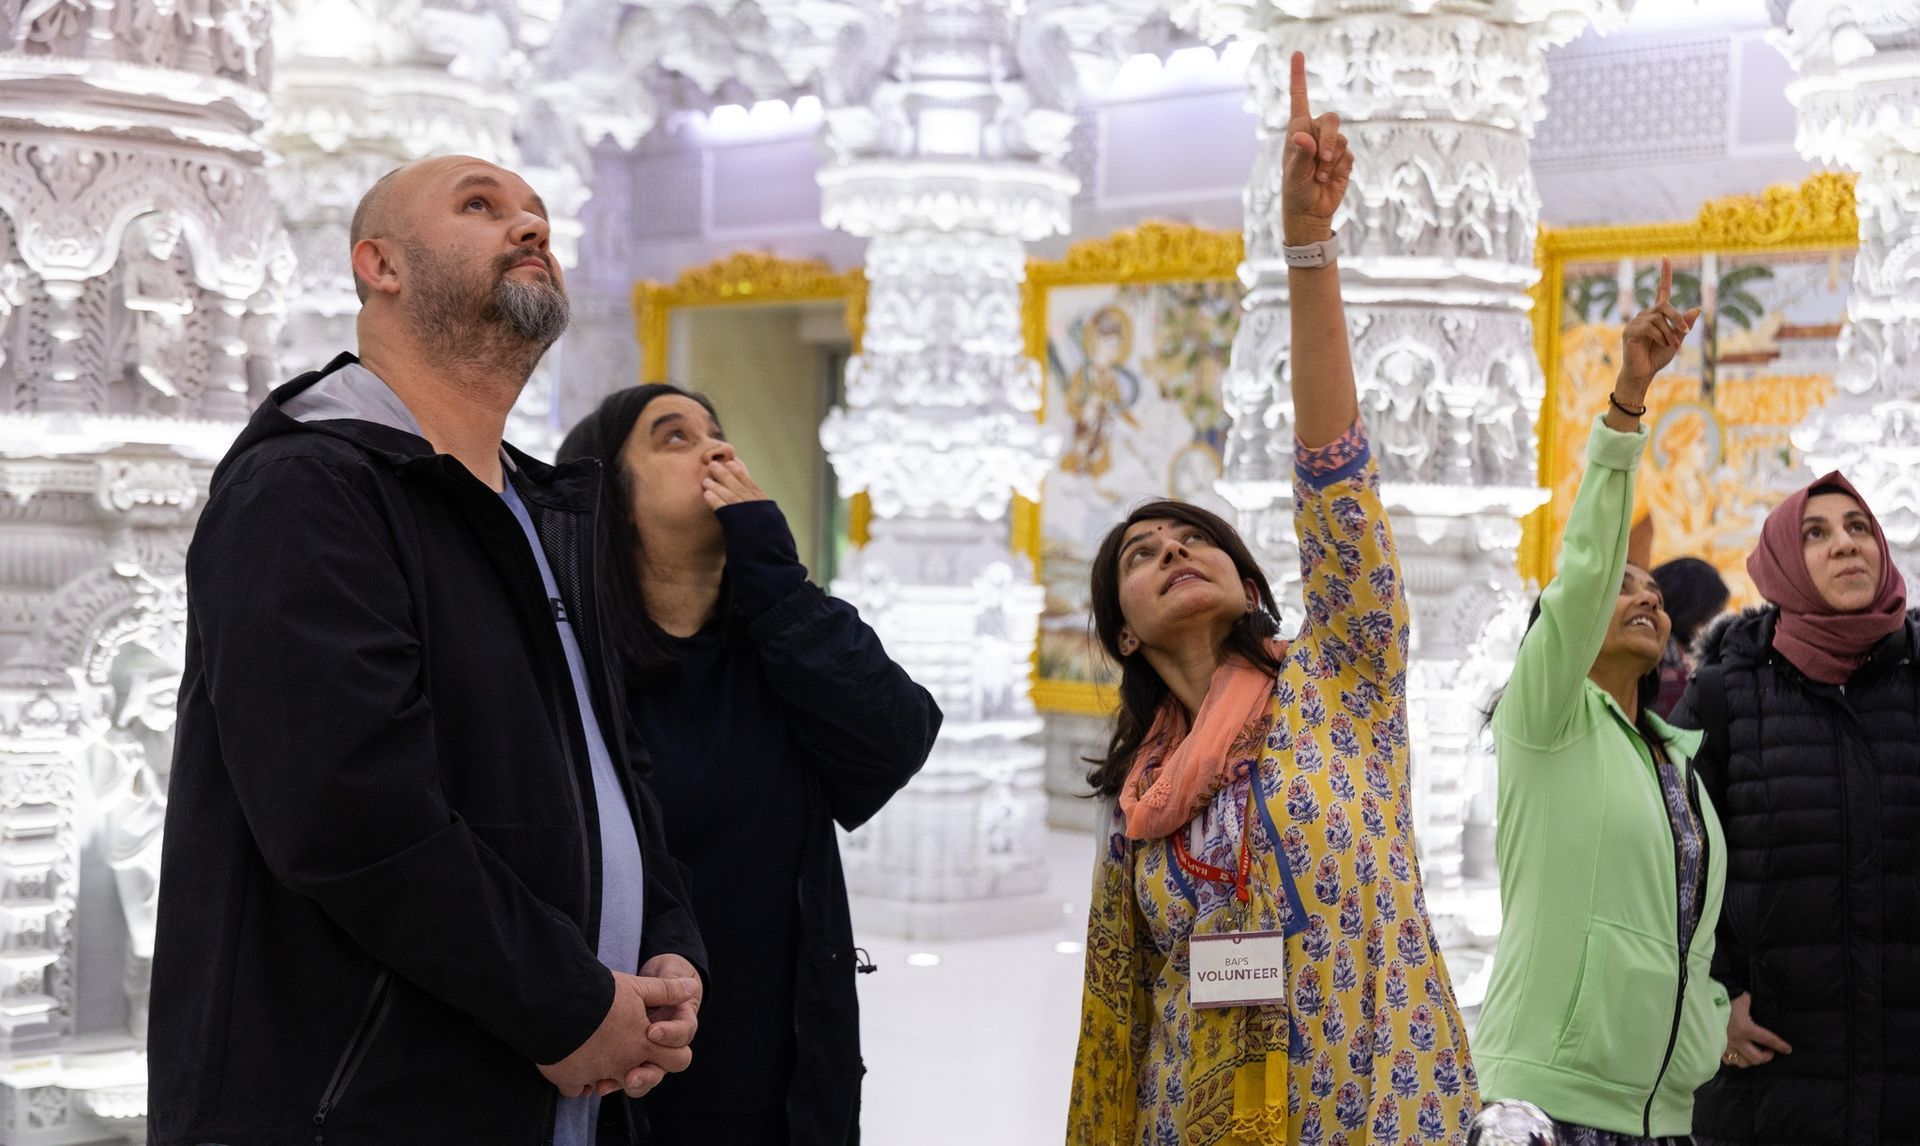 World’s Largest Hindu Temple: world record in Robbinsville, New Jersey